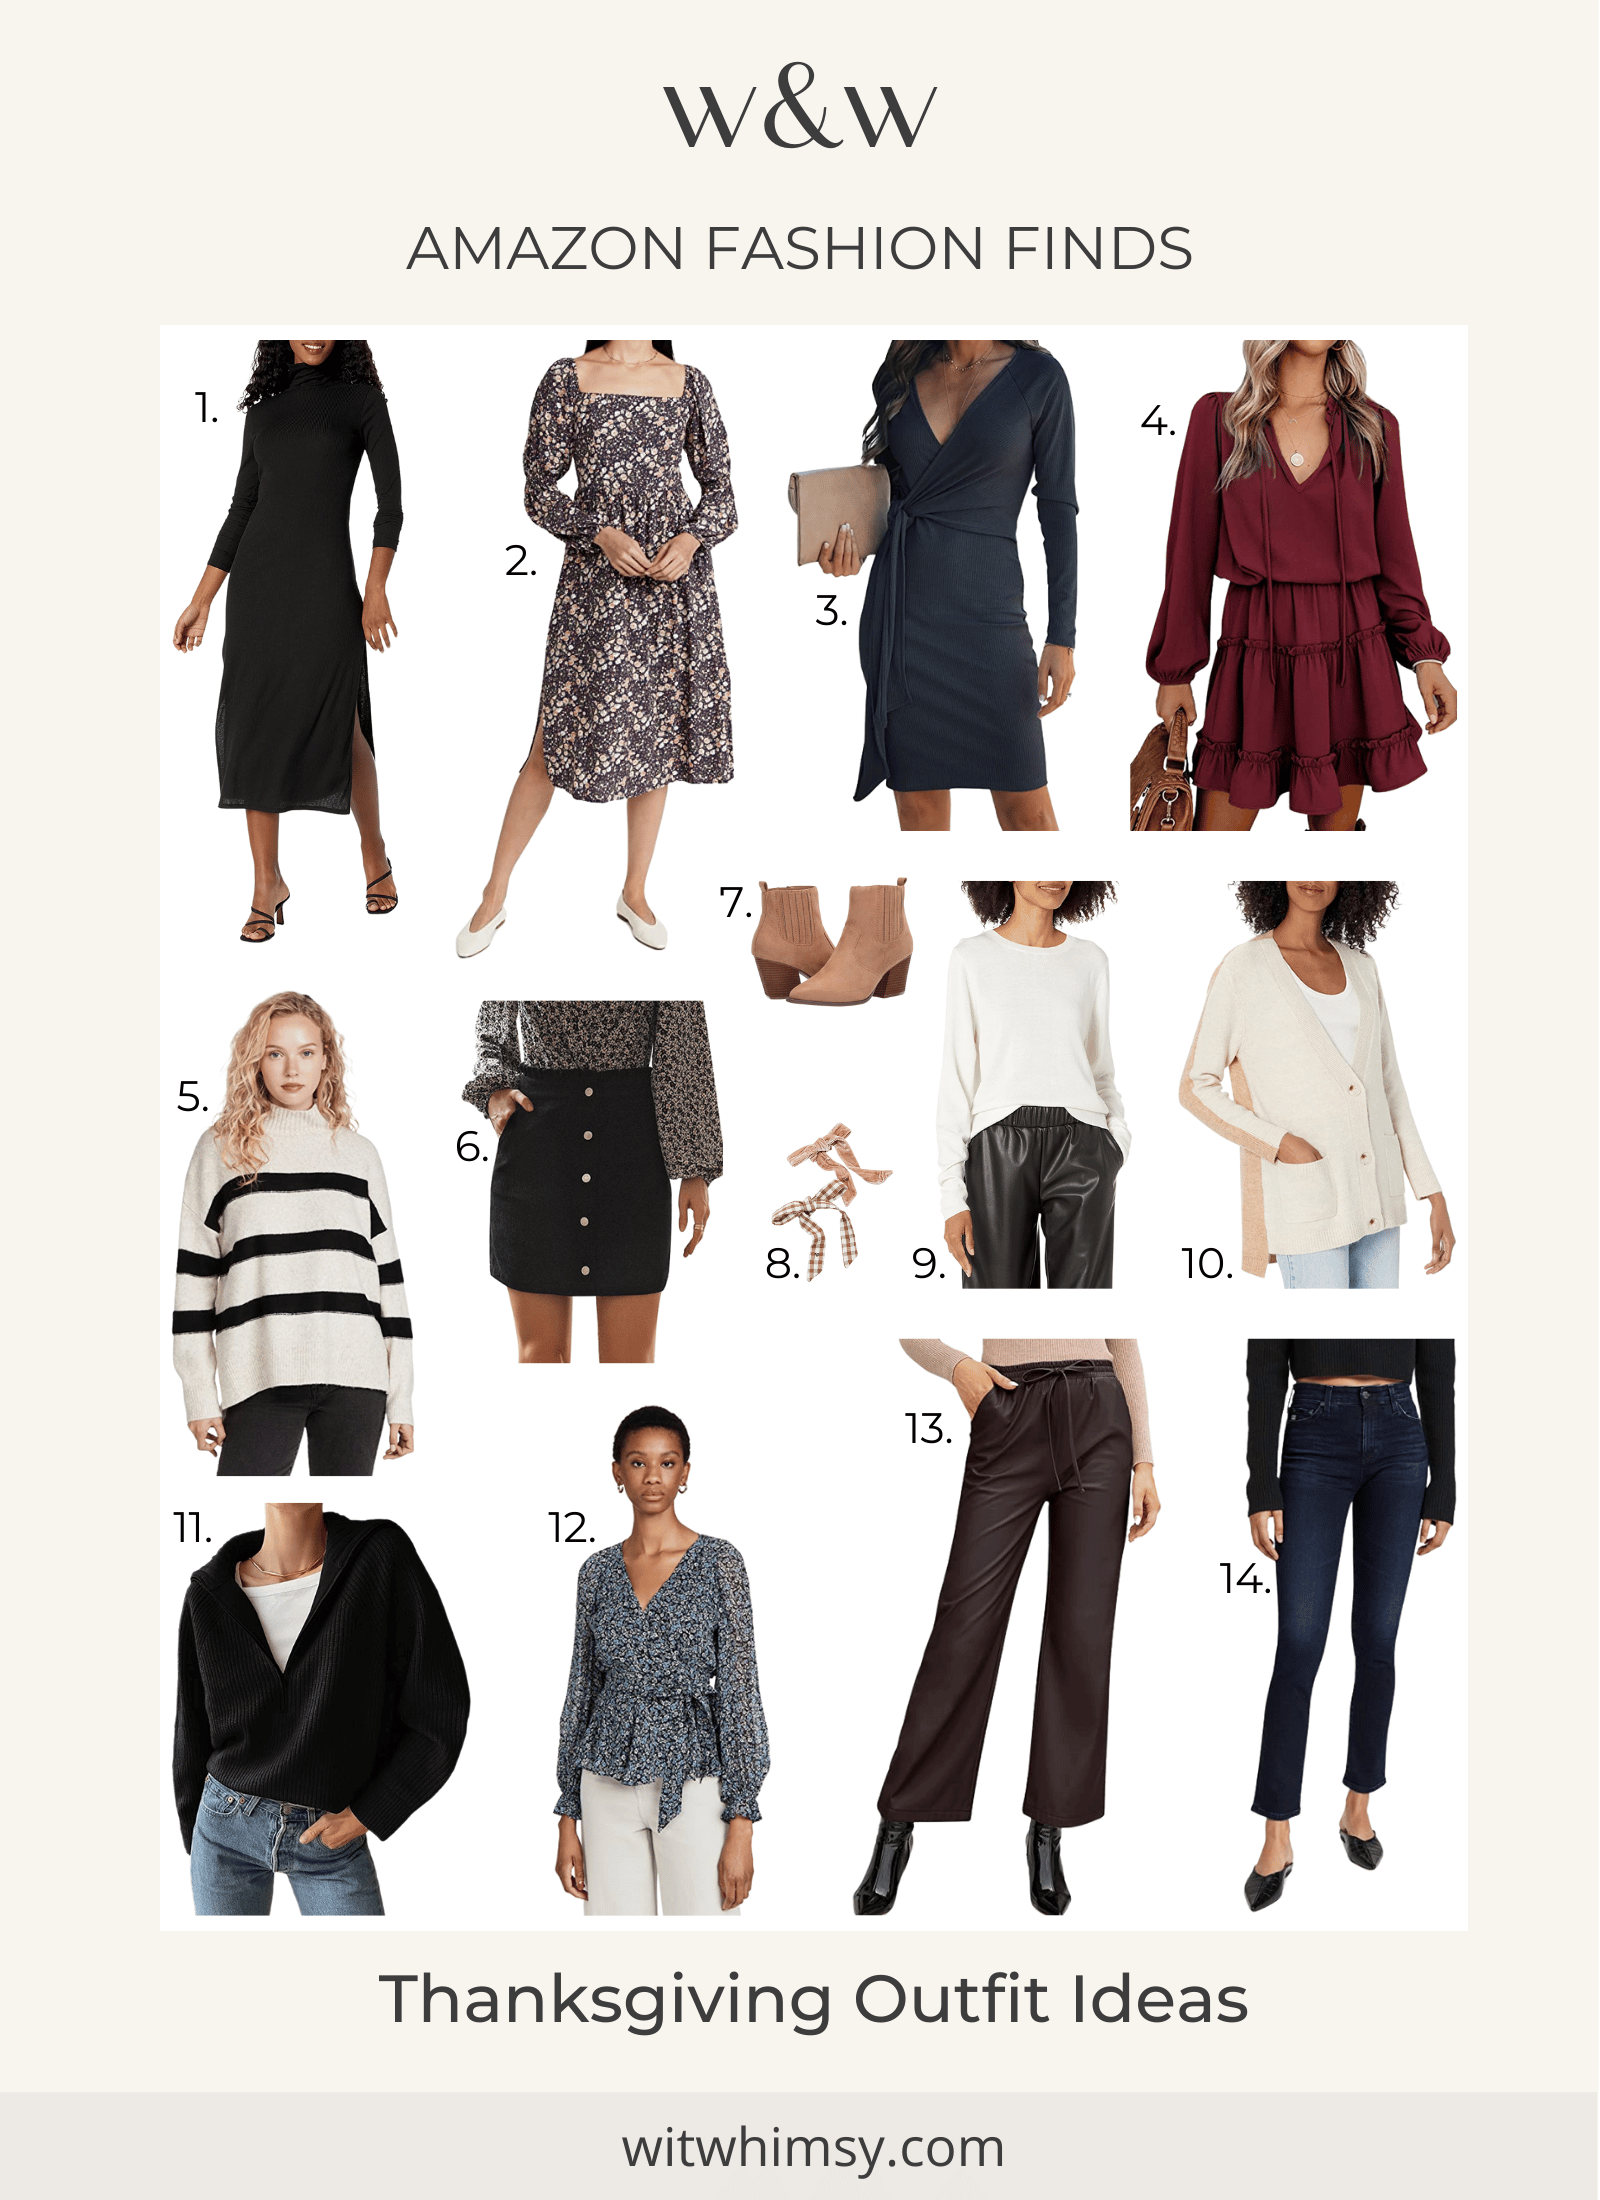 https://witwhimsy.com/wp-content/uploads/2021/11/Blog-Round-Up_Fashion-Finds-Amazon-Fashion_Thanksgiving-Outfit-Ideas.png